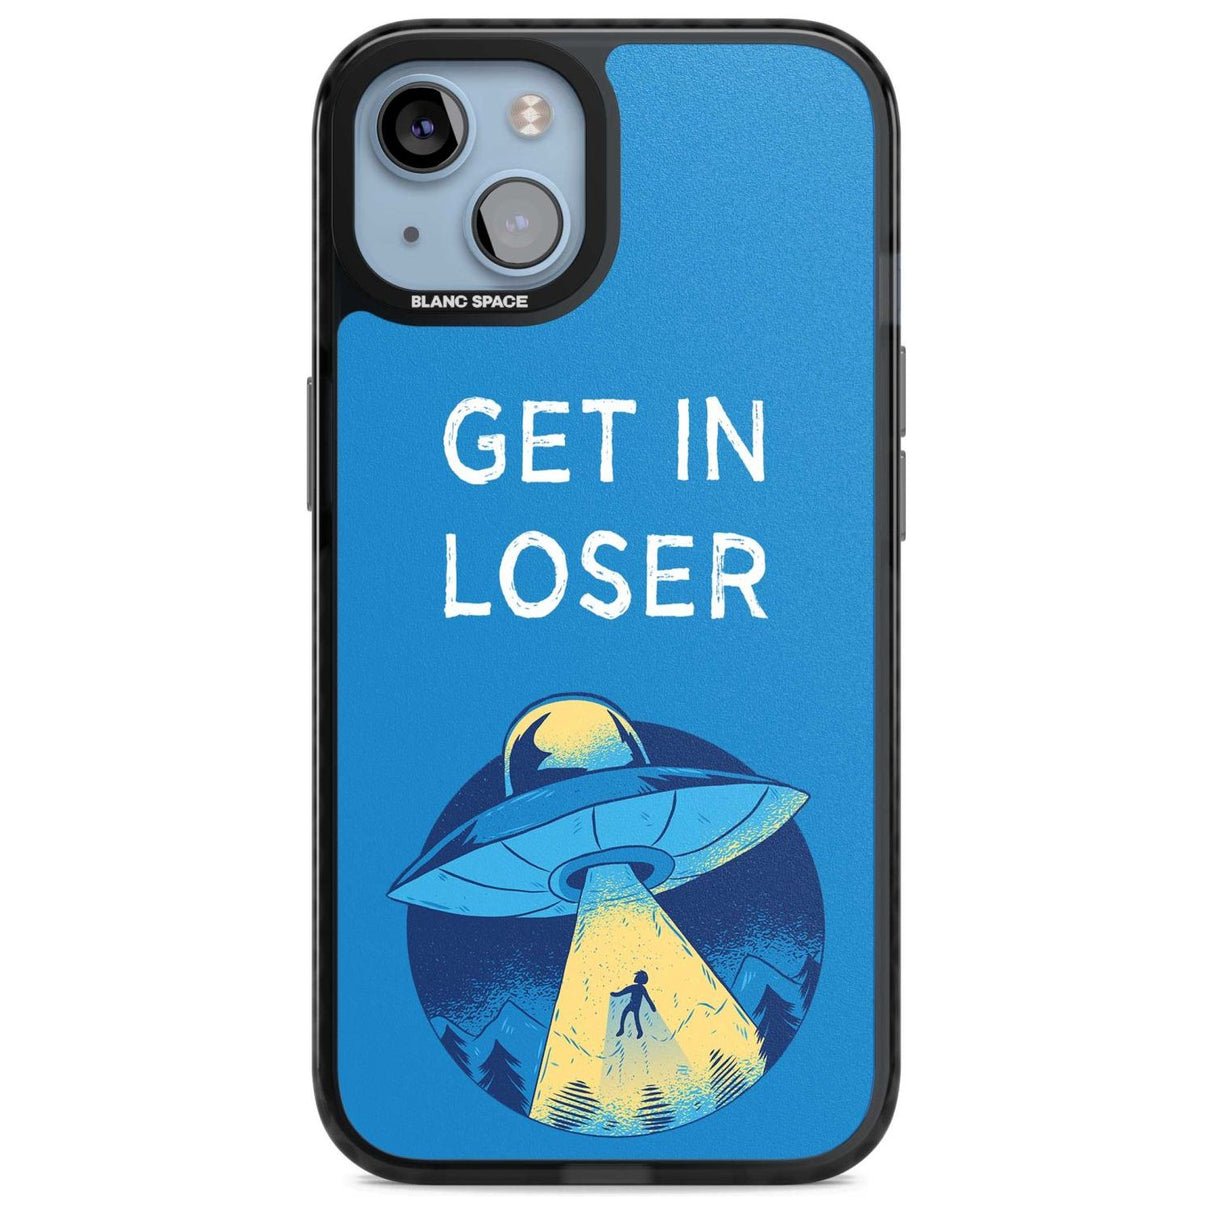 Get in Loser UFO Phone Case iPhone 15 / Magsafe Black Impact Case,iPhone 15 Plus / Magsafe Black Impact Case,iPhone 13 / Magsafe Black Impact Case,iPhone 14 / Magsafe Black Impact Case,iPhone 14 Plus / Magsafe Black Impact Case Blanc Space